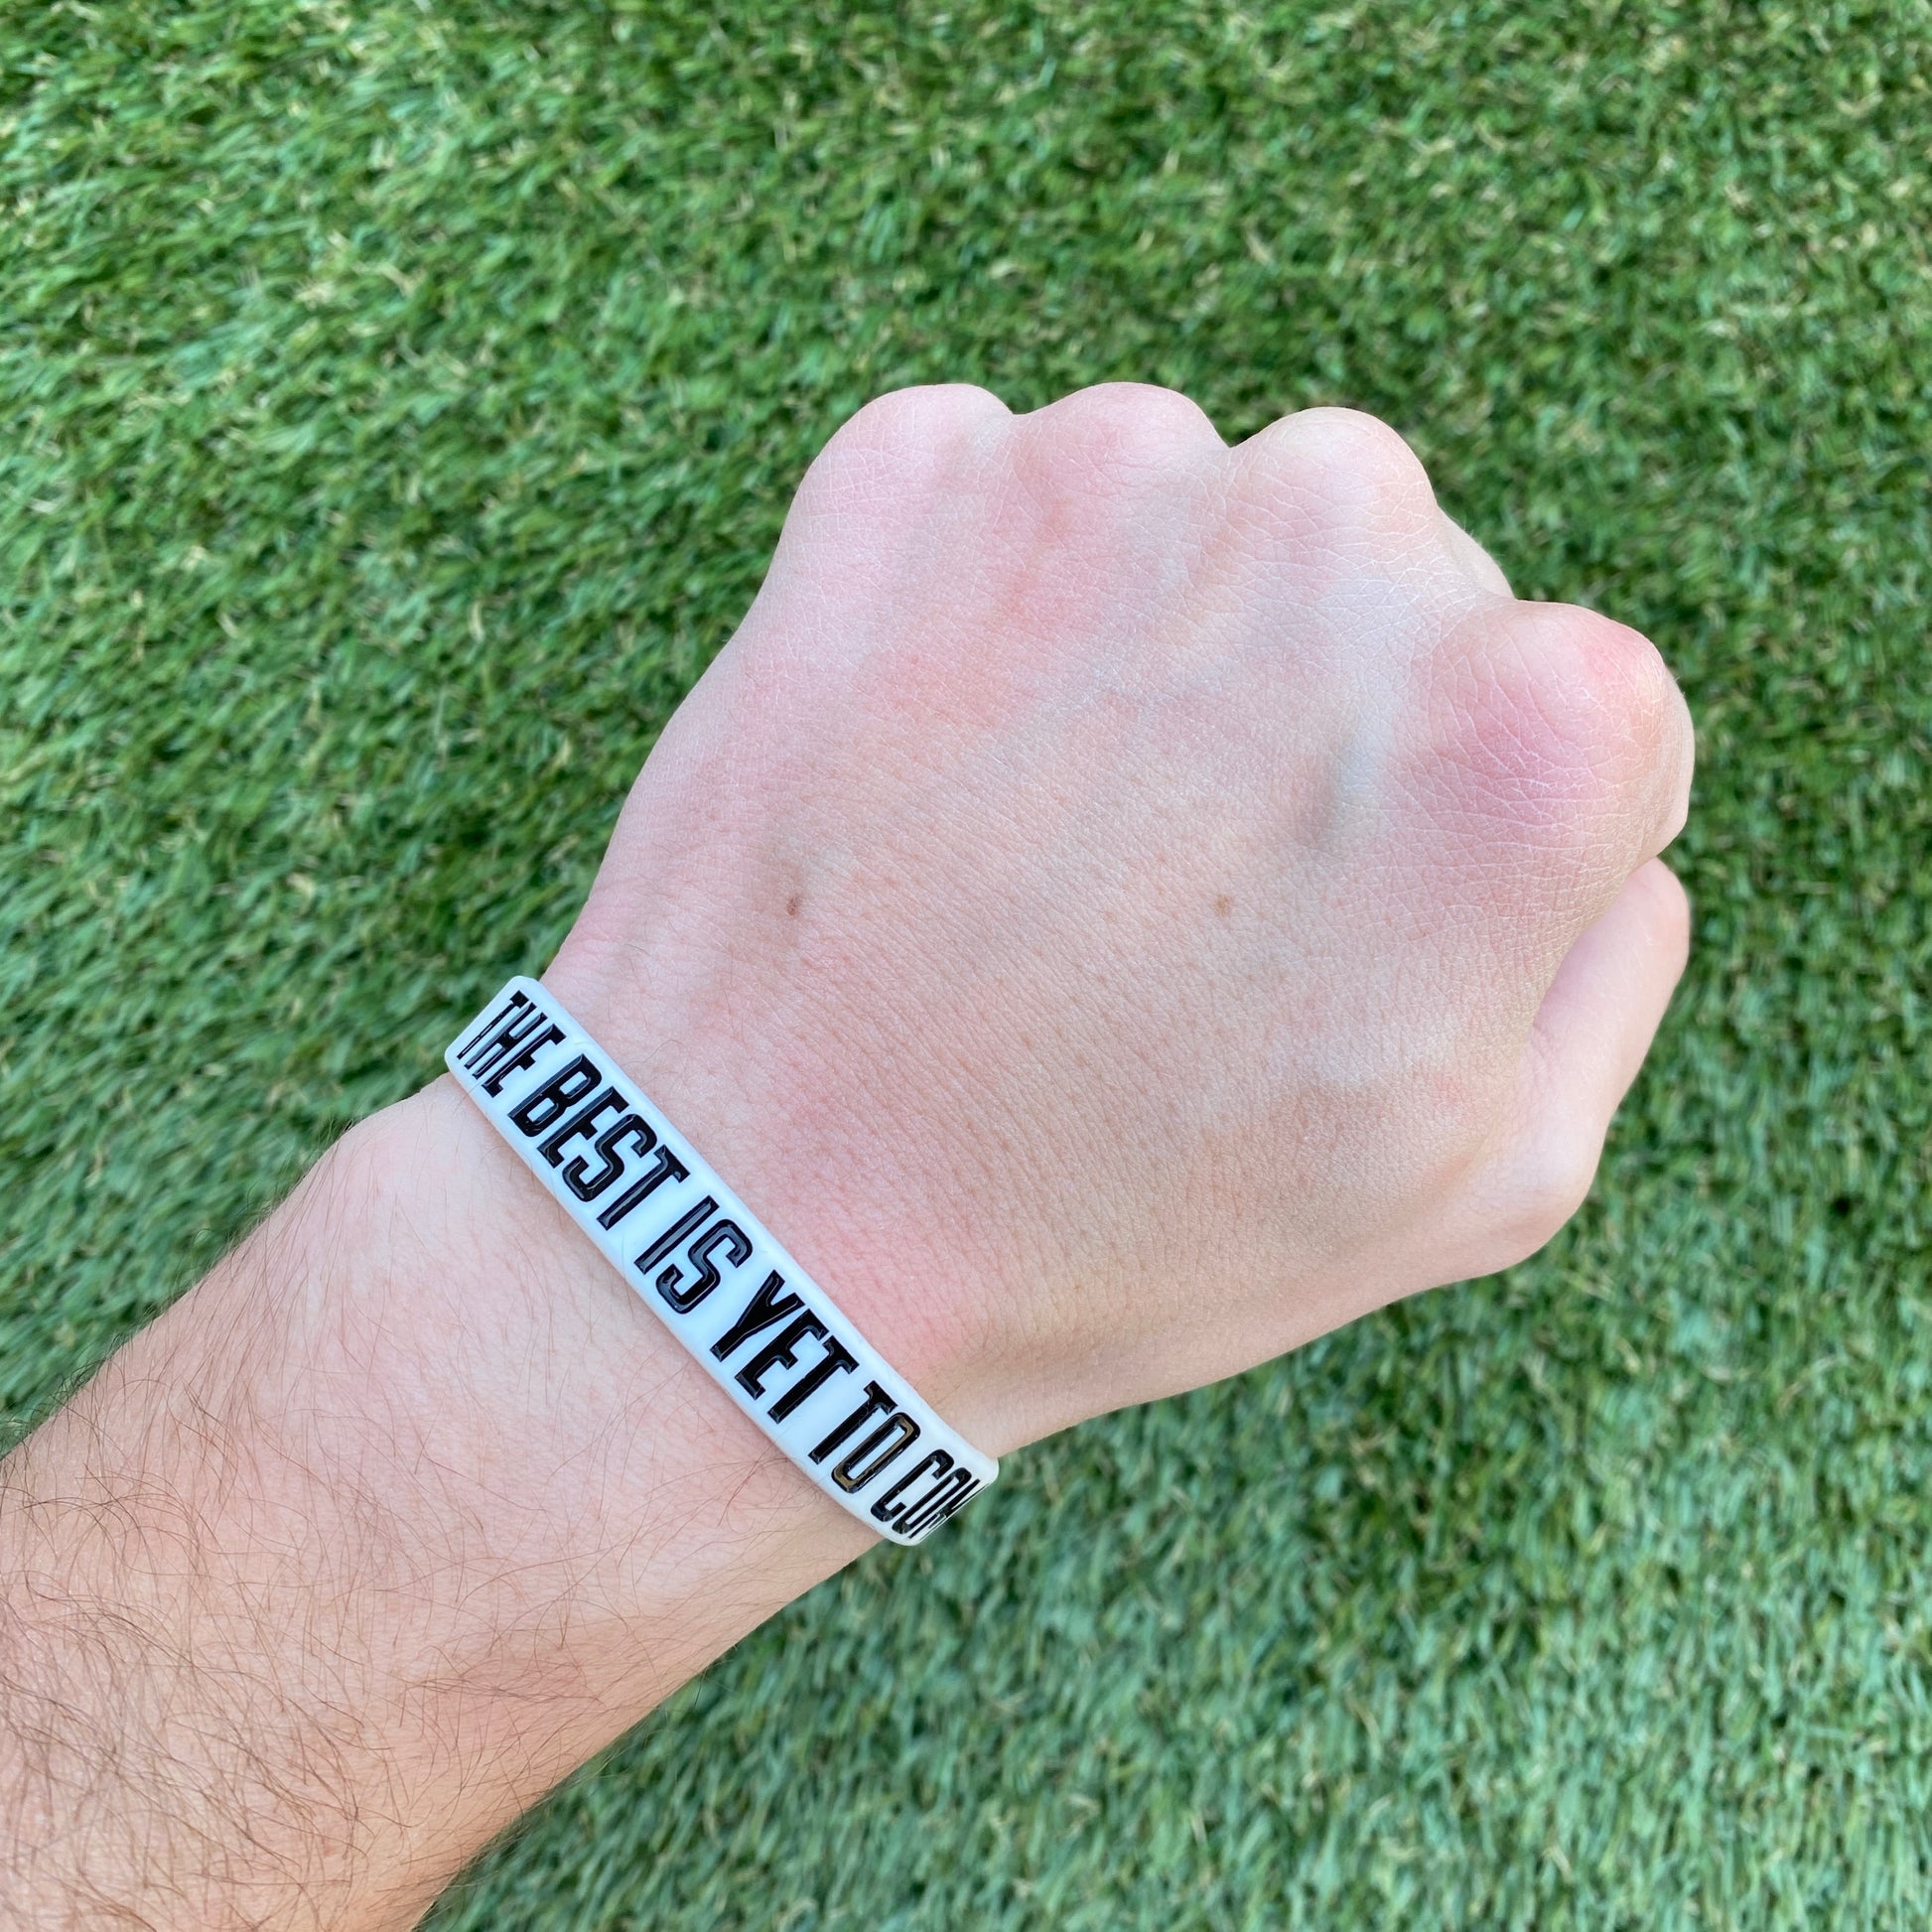 THE BEST IS YET TO COME Wristband